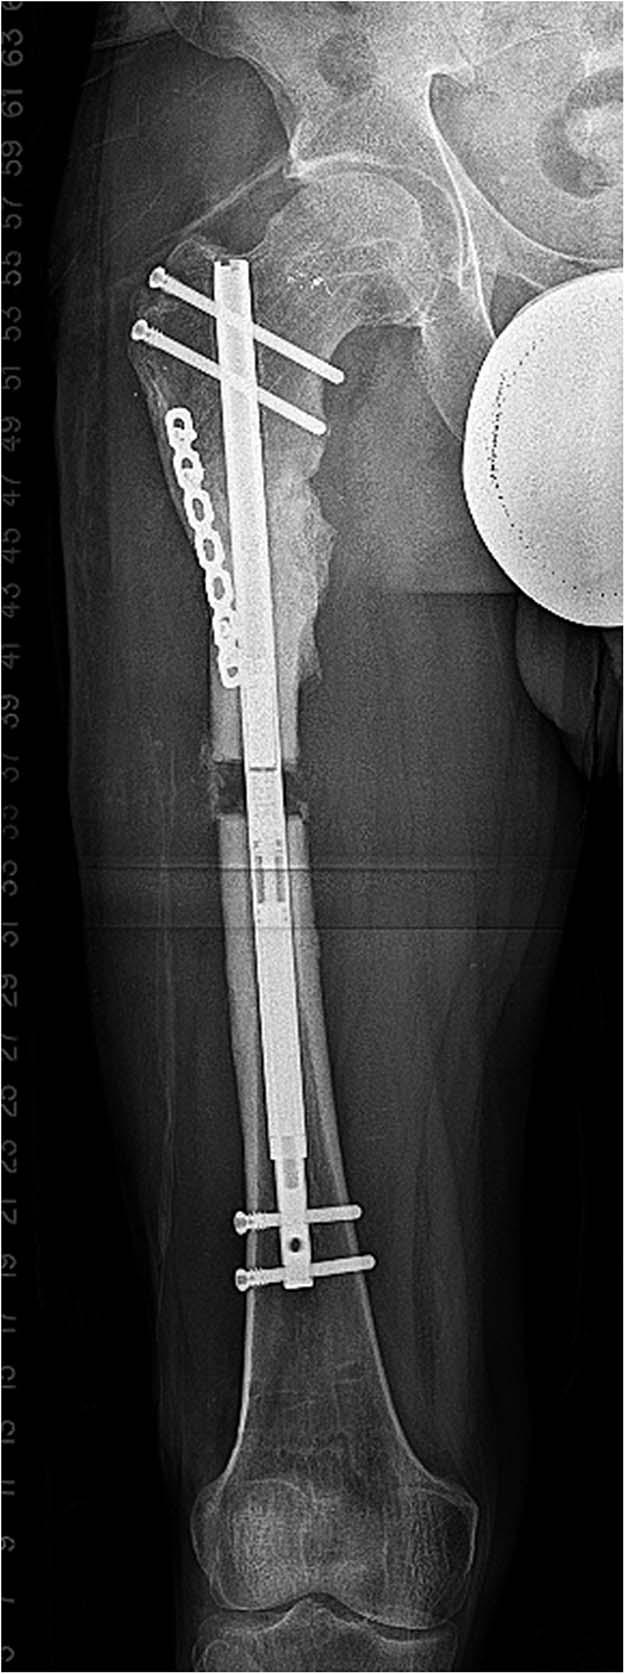 He was placed in traction and a CT scan, obtained for surgical planning, provided detail on the extent of poorly vascularized bone at the fracture site.